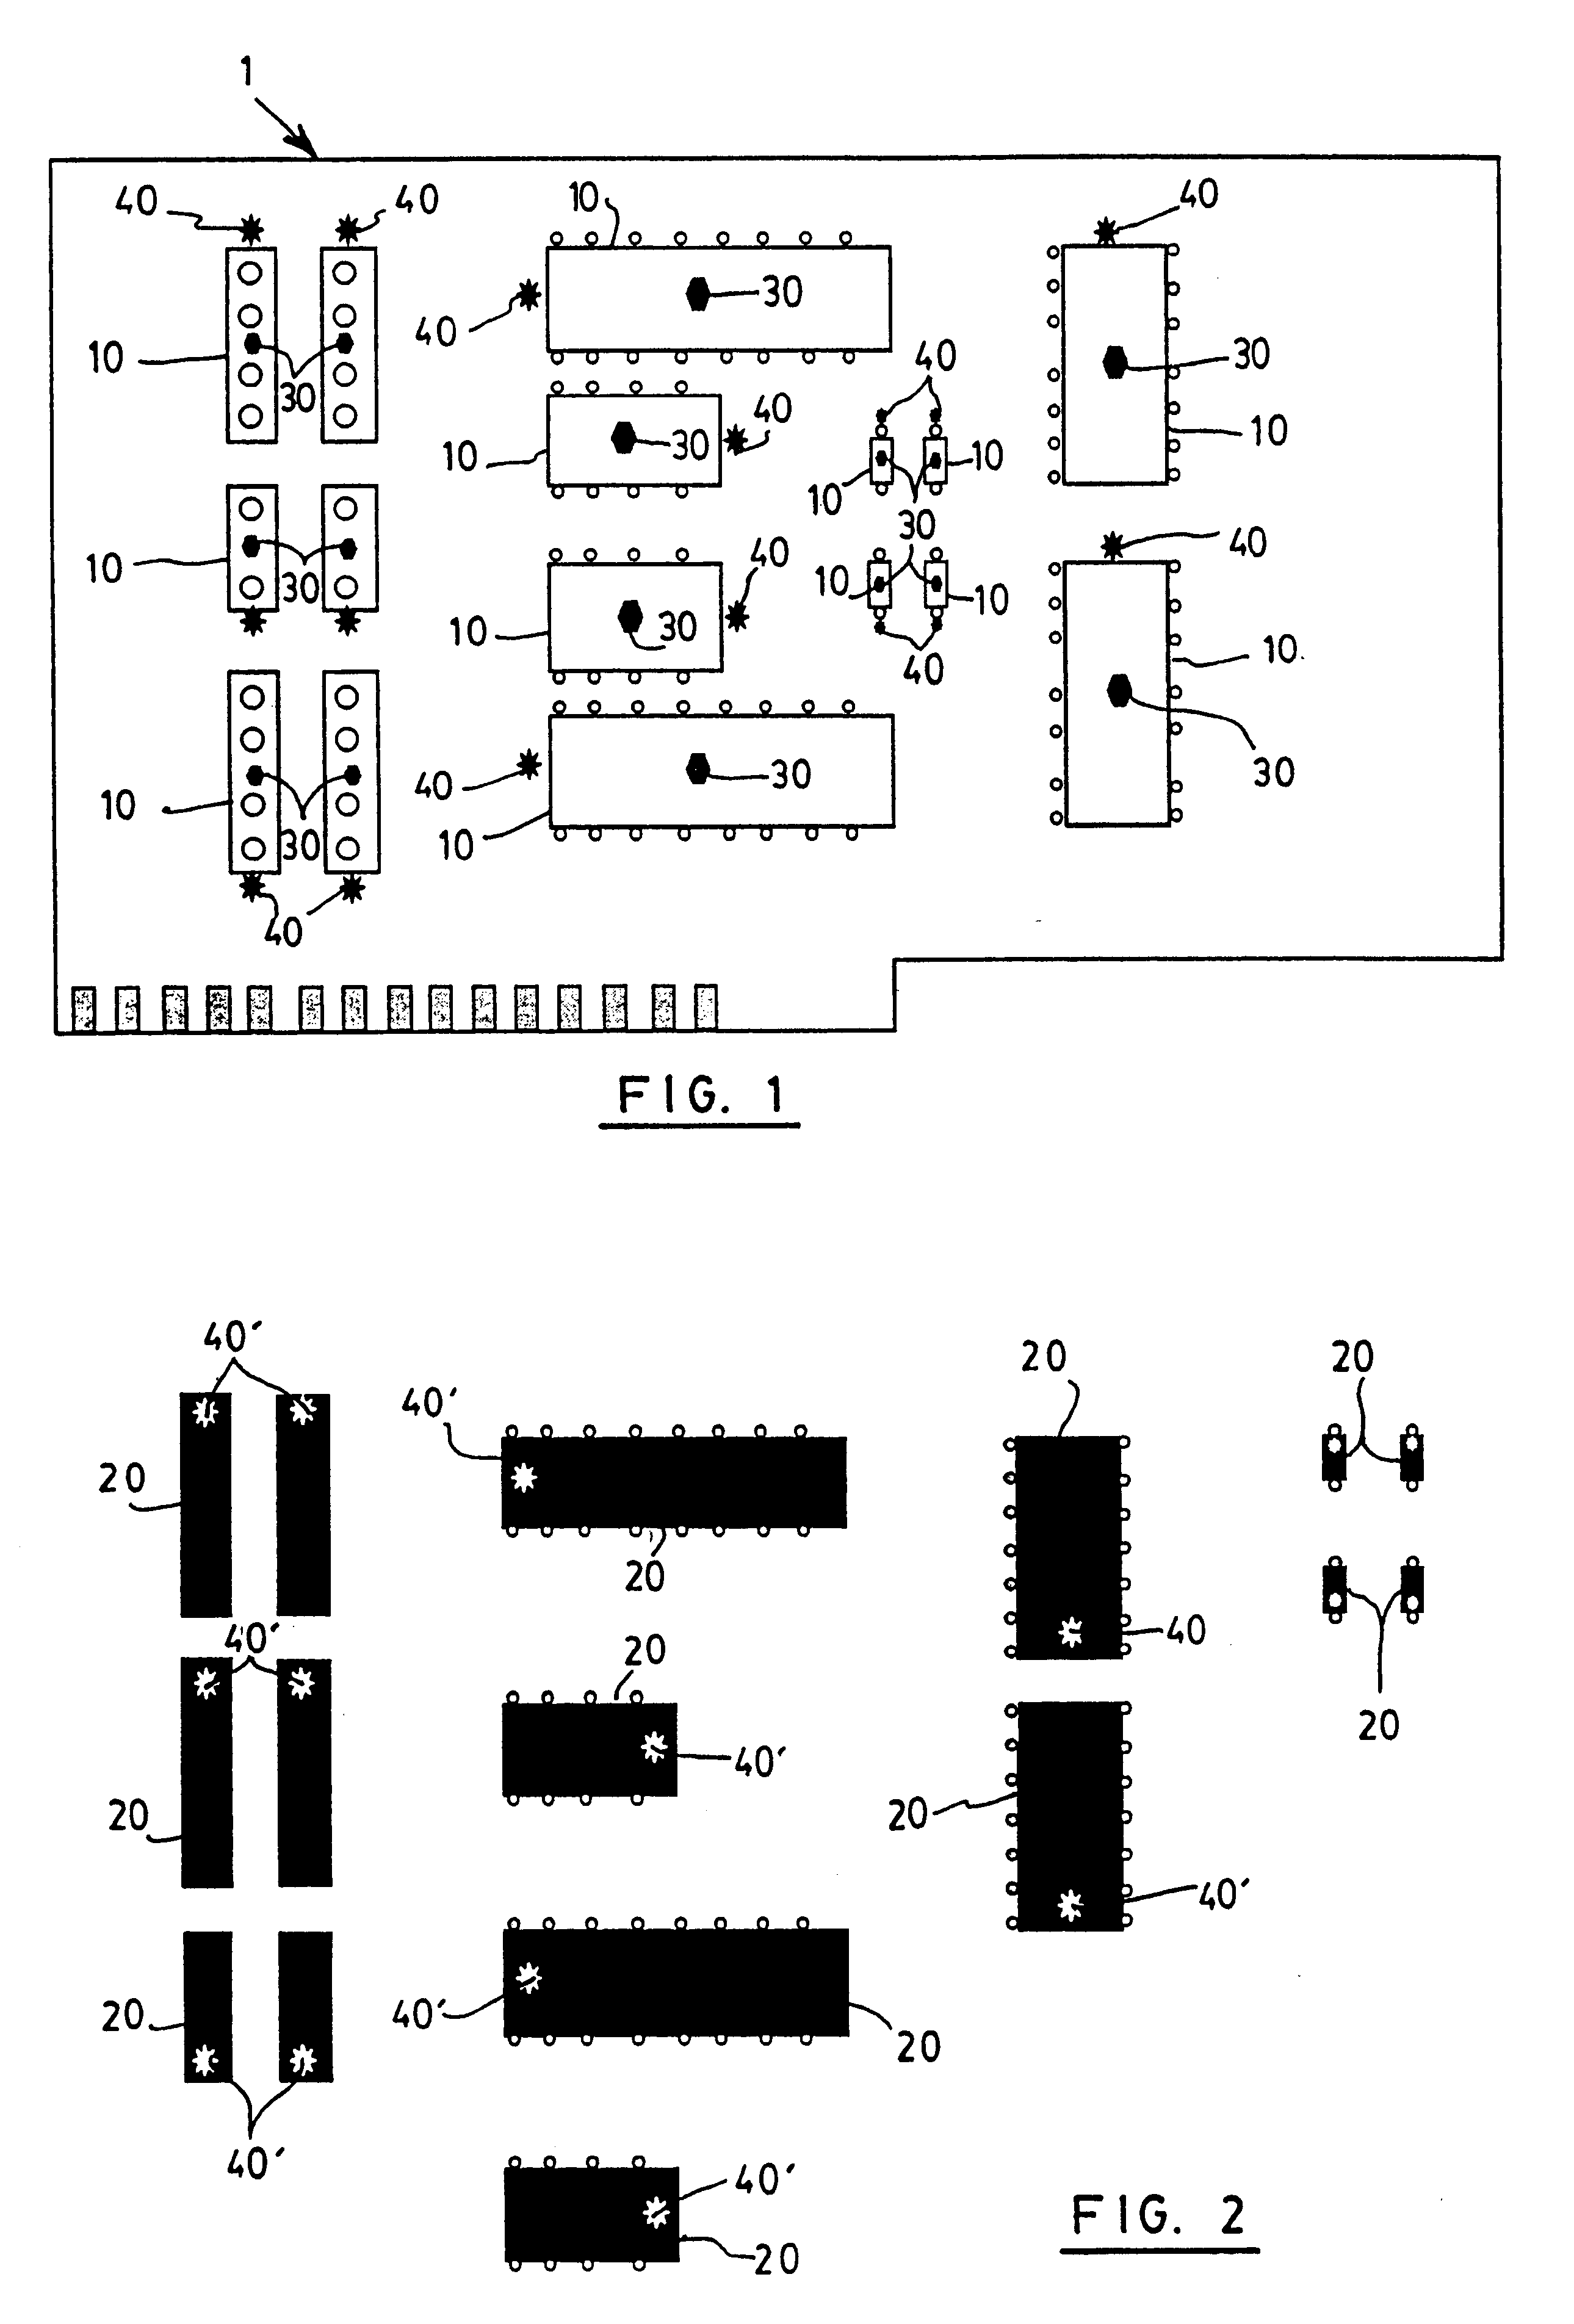 Method for the verification of the polarity, presence, alignment of components and short circuits on a printed circuits board